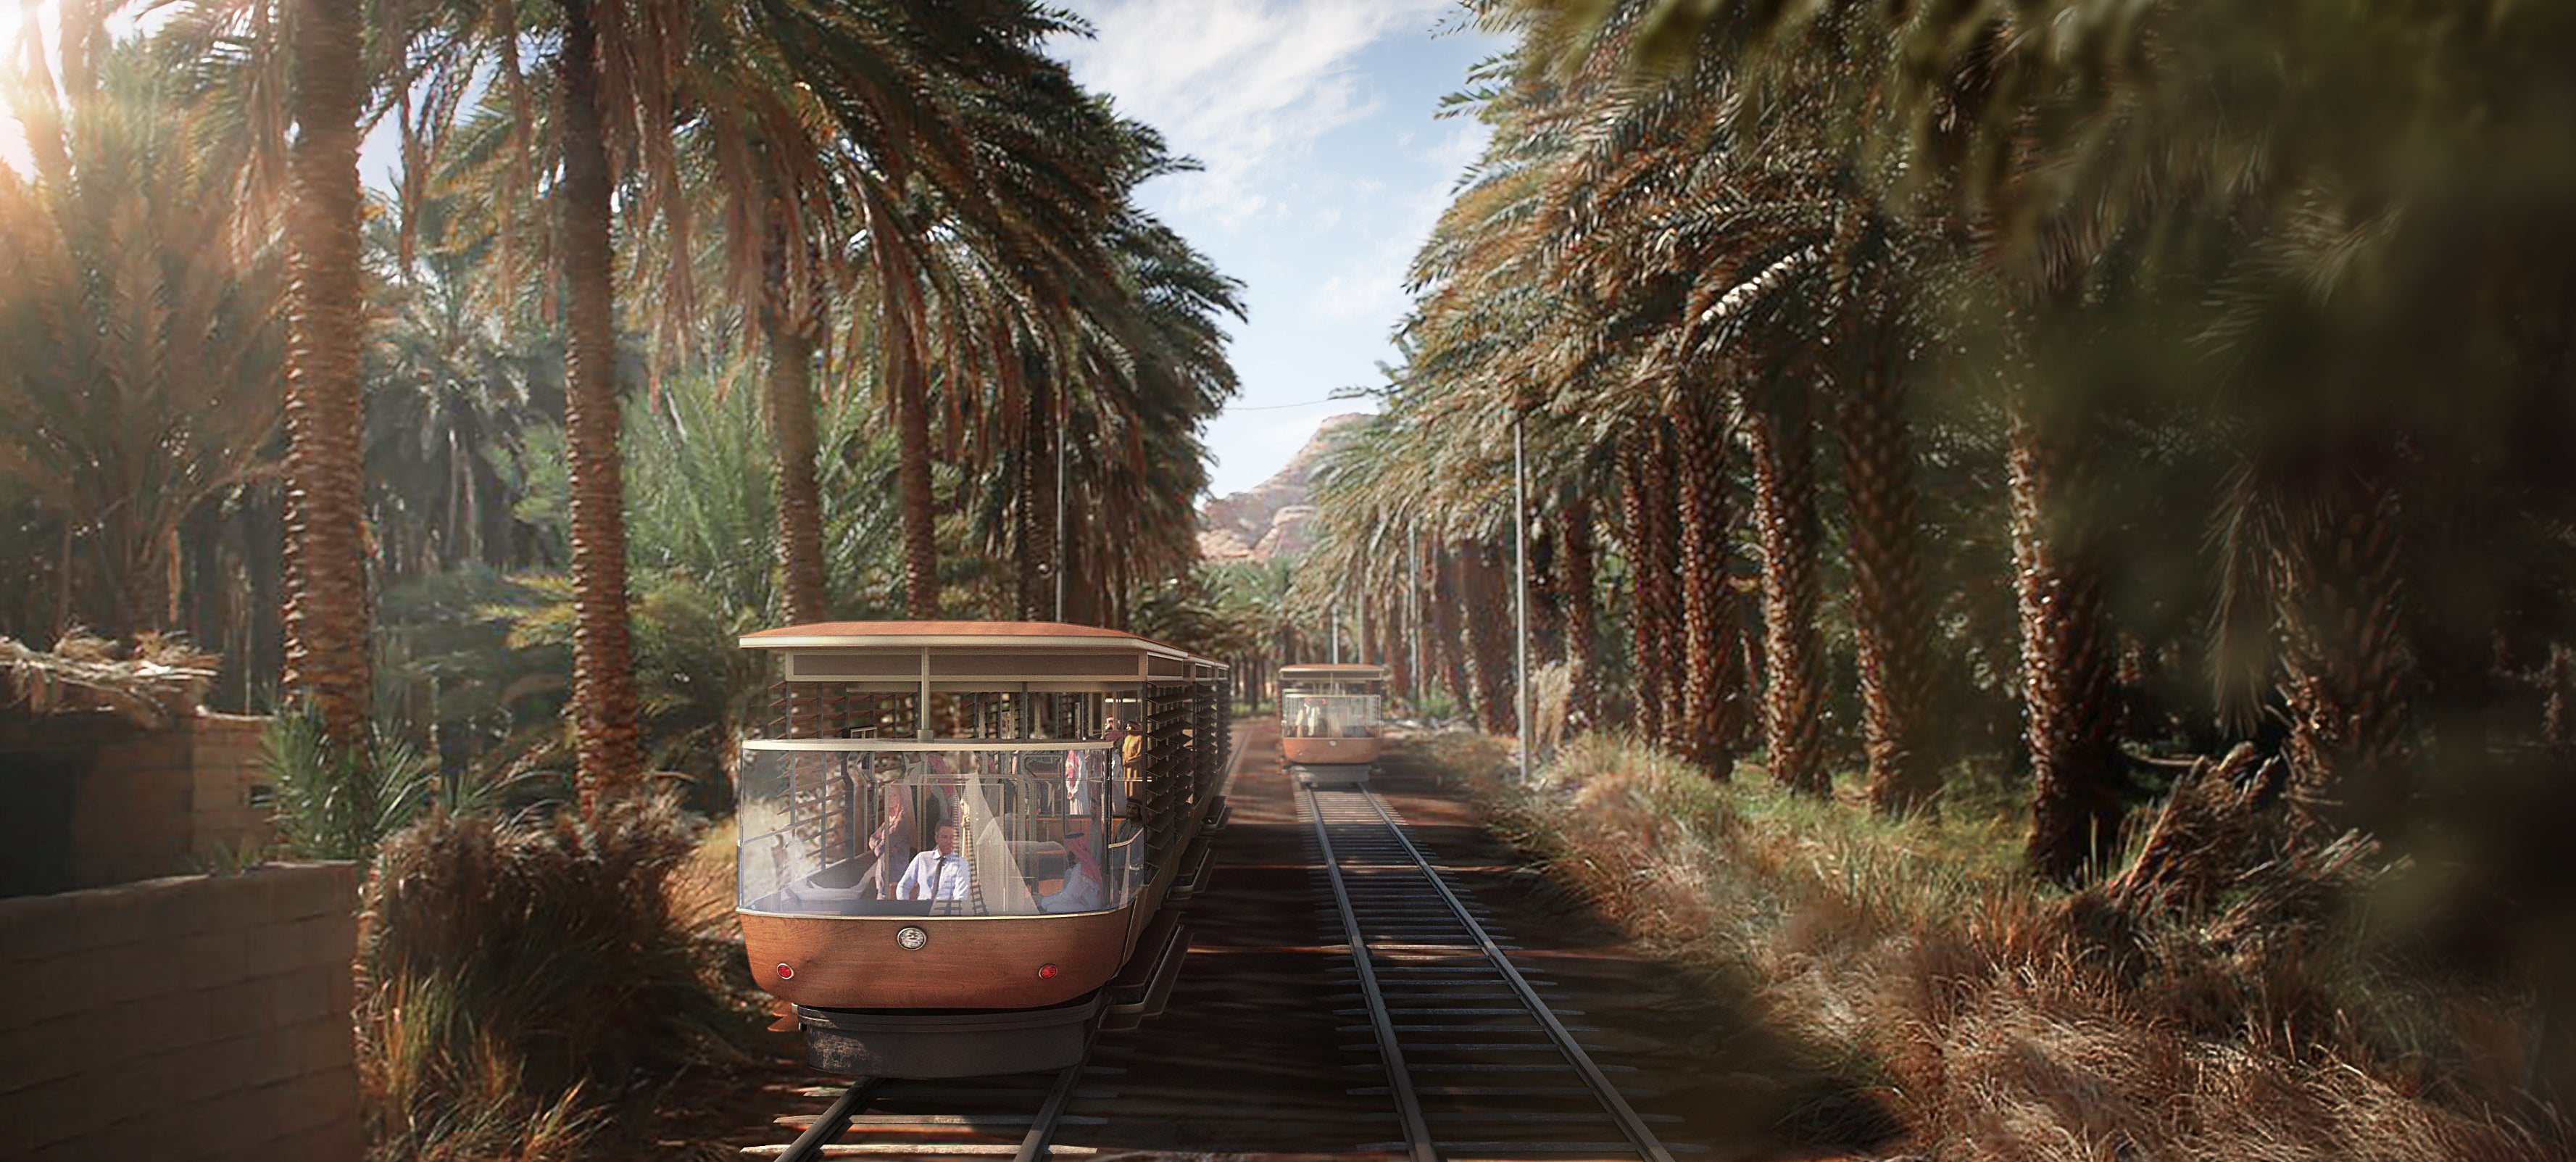 A new low carbon tram line is just one of the ways that AlUla is driving sustainability